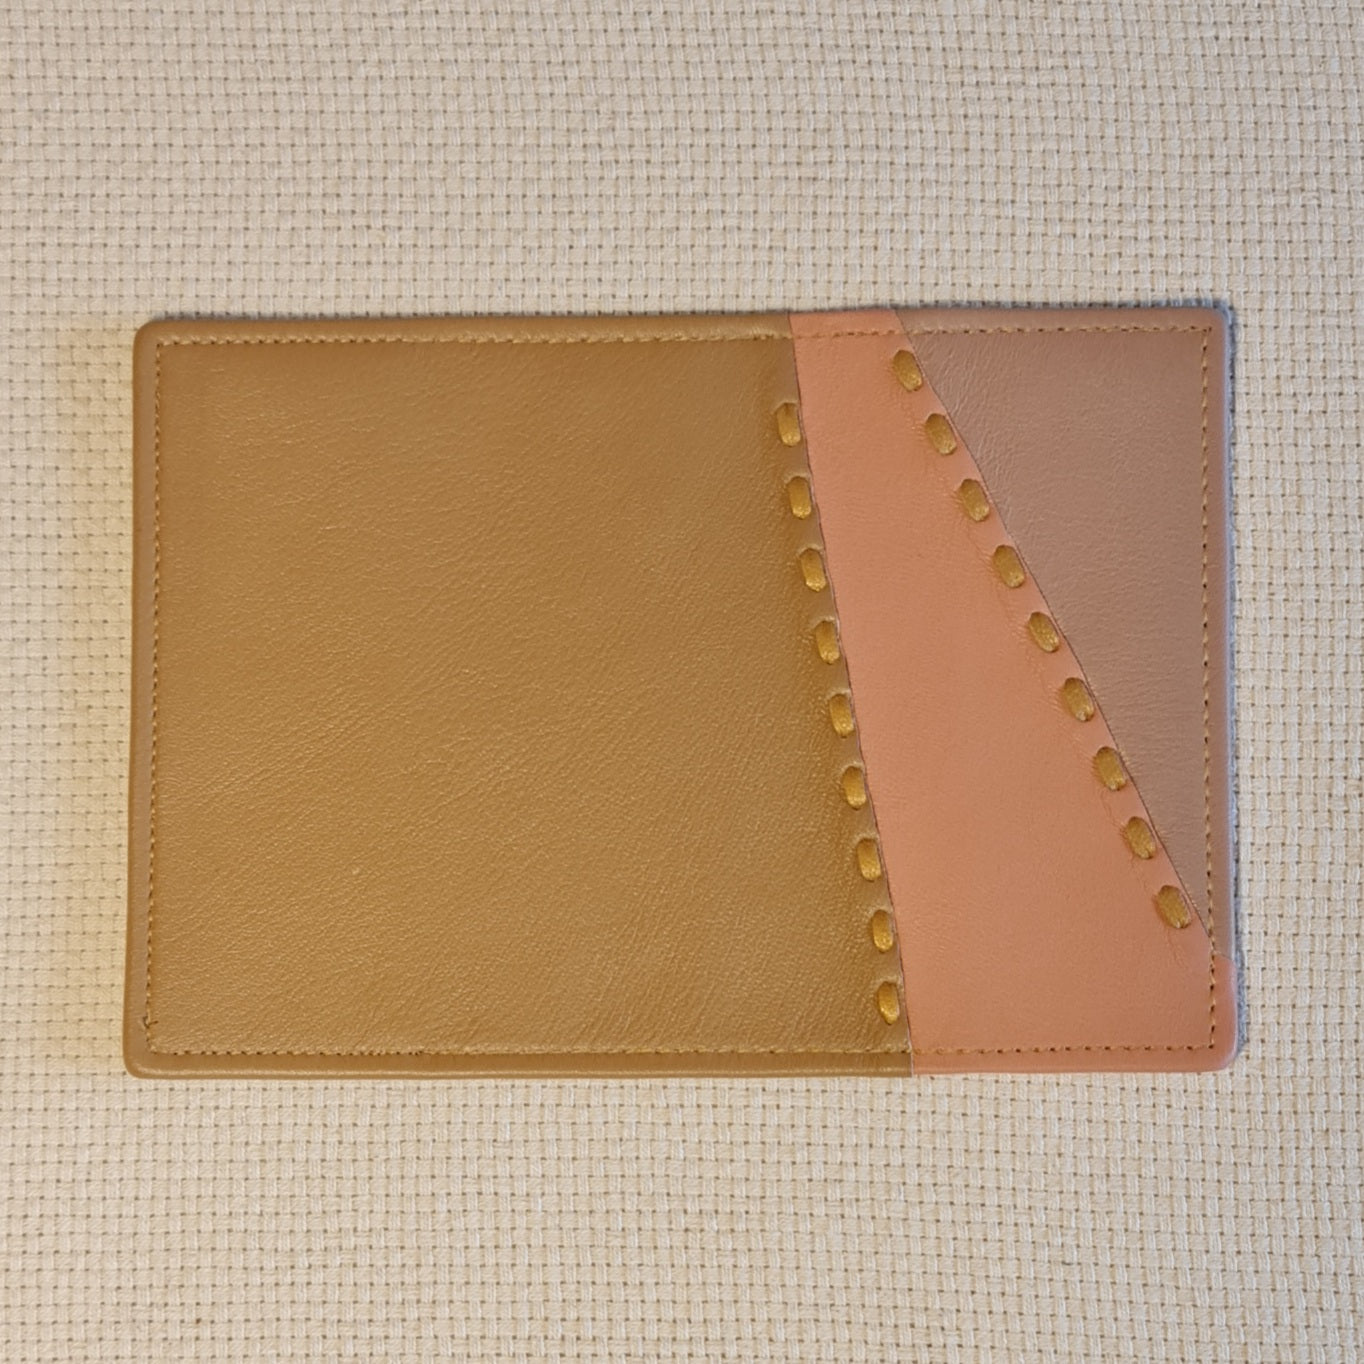 Brown / soft pink / light brown leather passport covers with brown back and vertical triangle decorative stitching (RRA)